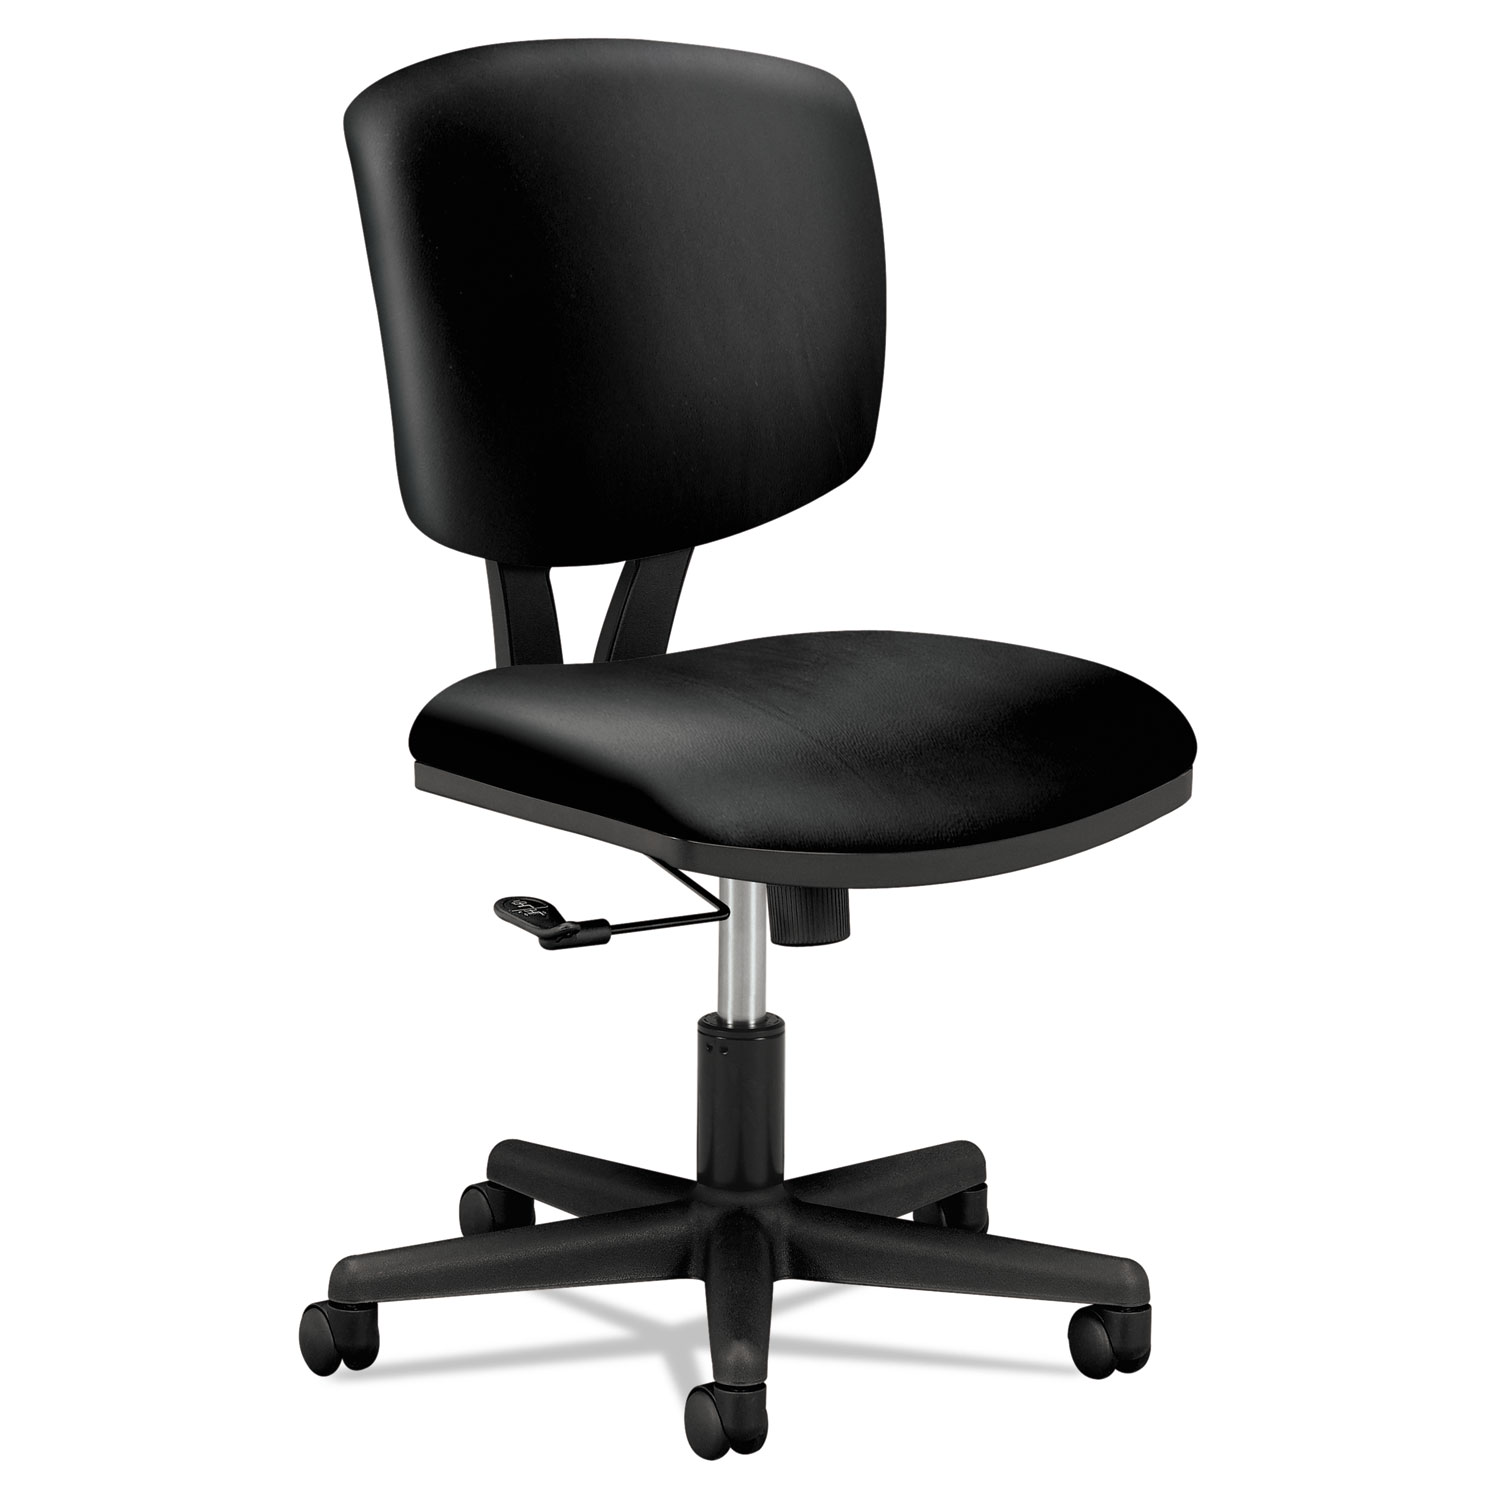  HON H5701.SB11.T Volt Series Leather Task Chair, Supports up to 250 lbs., Black Seat/Black Back, Black Base (HON5701SB11T) 